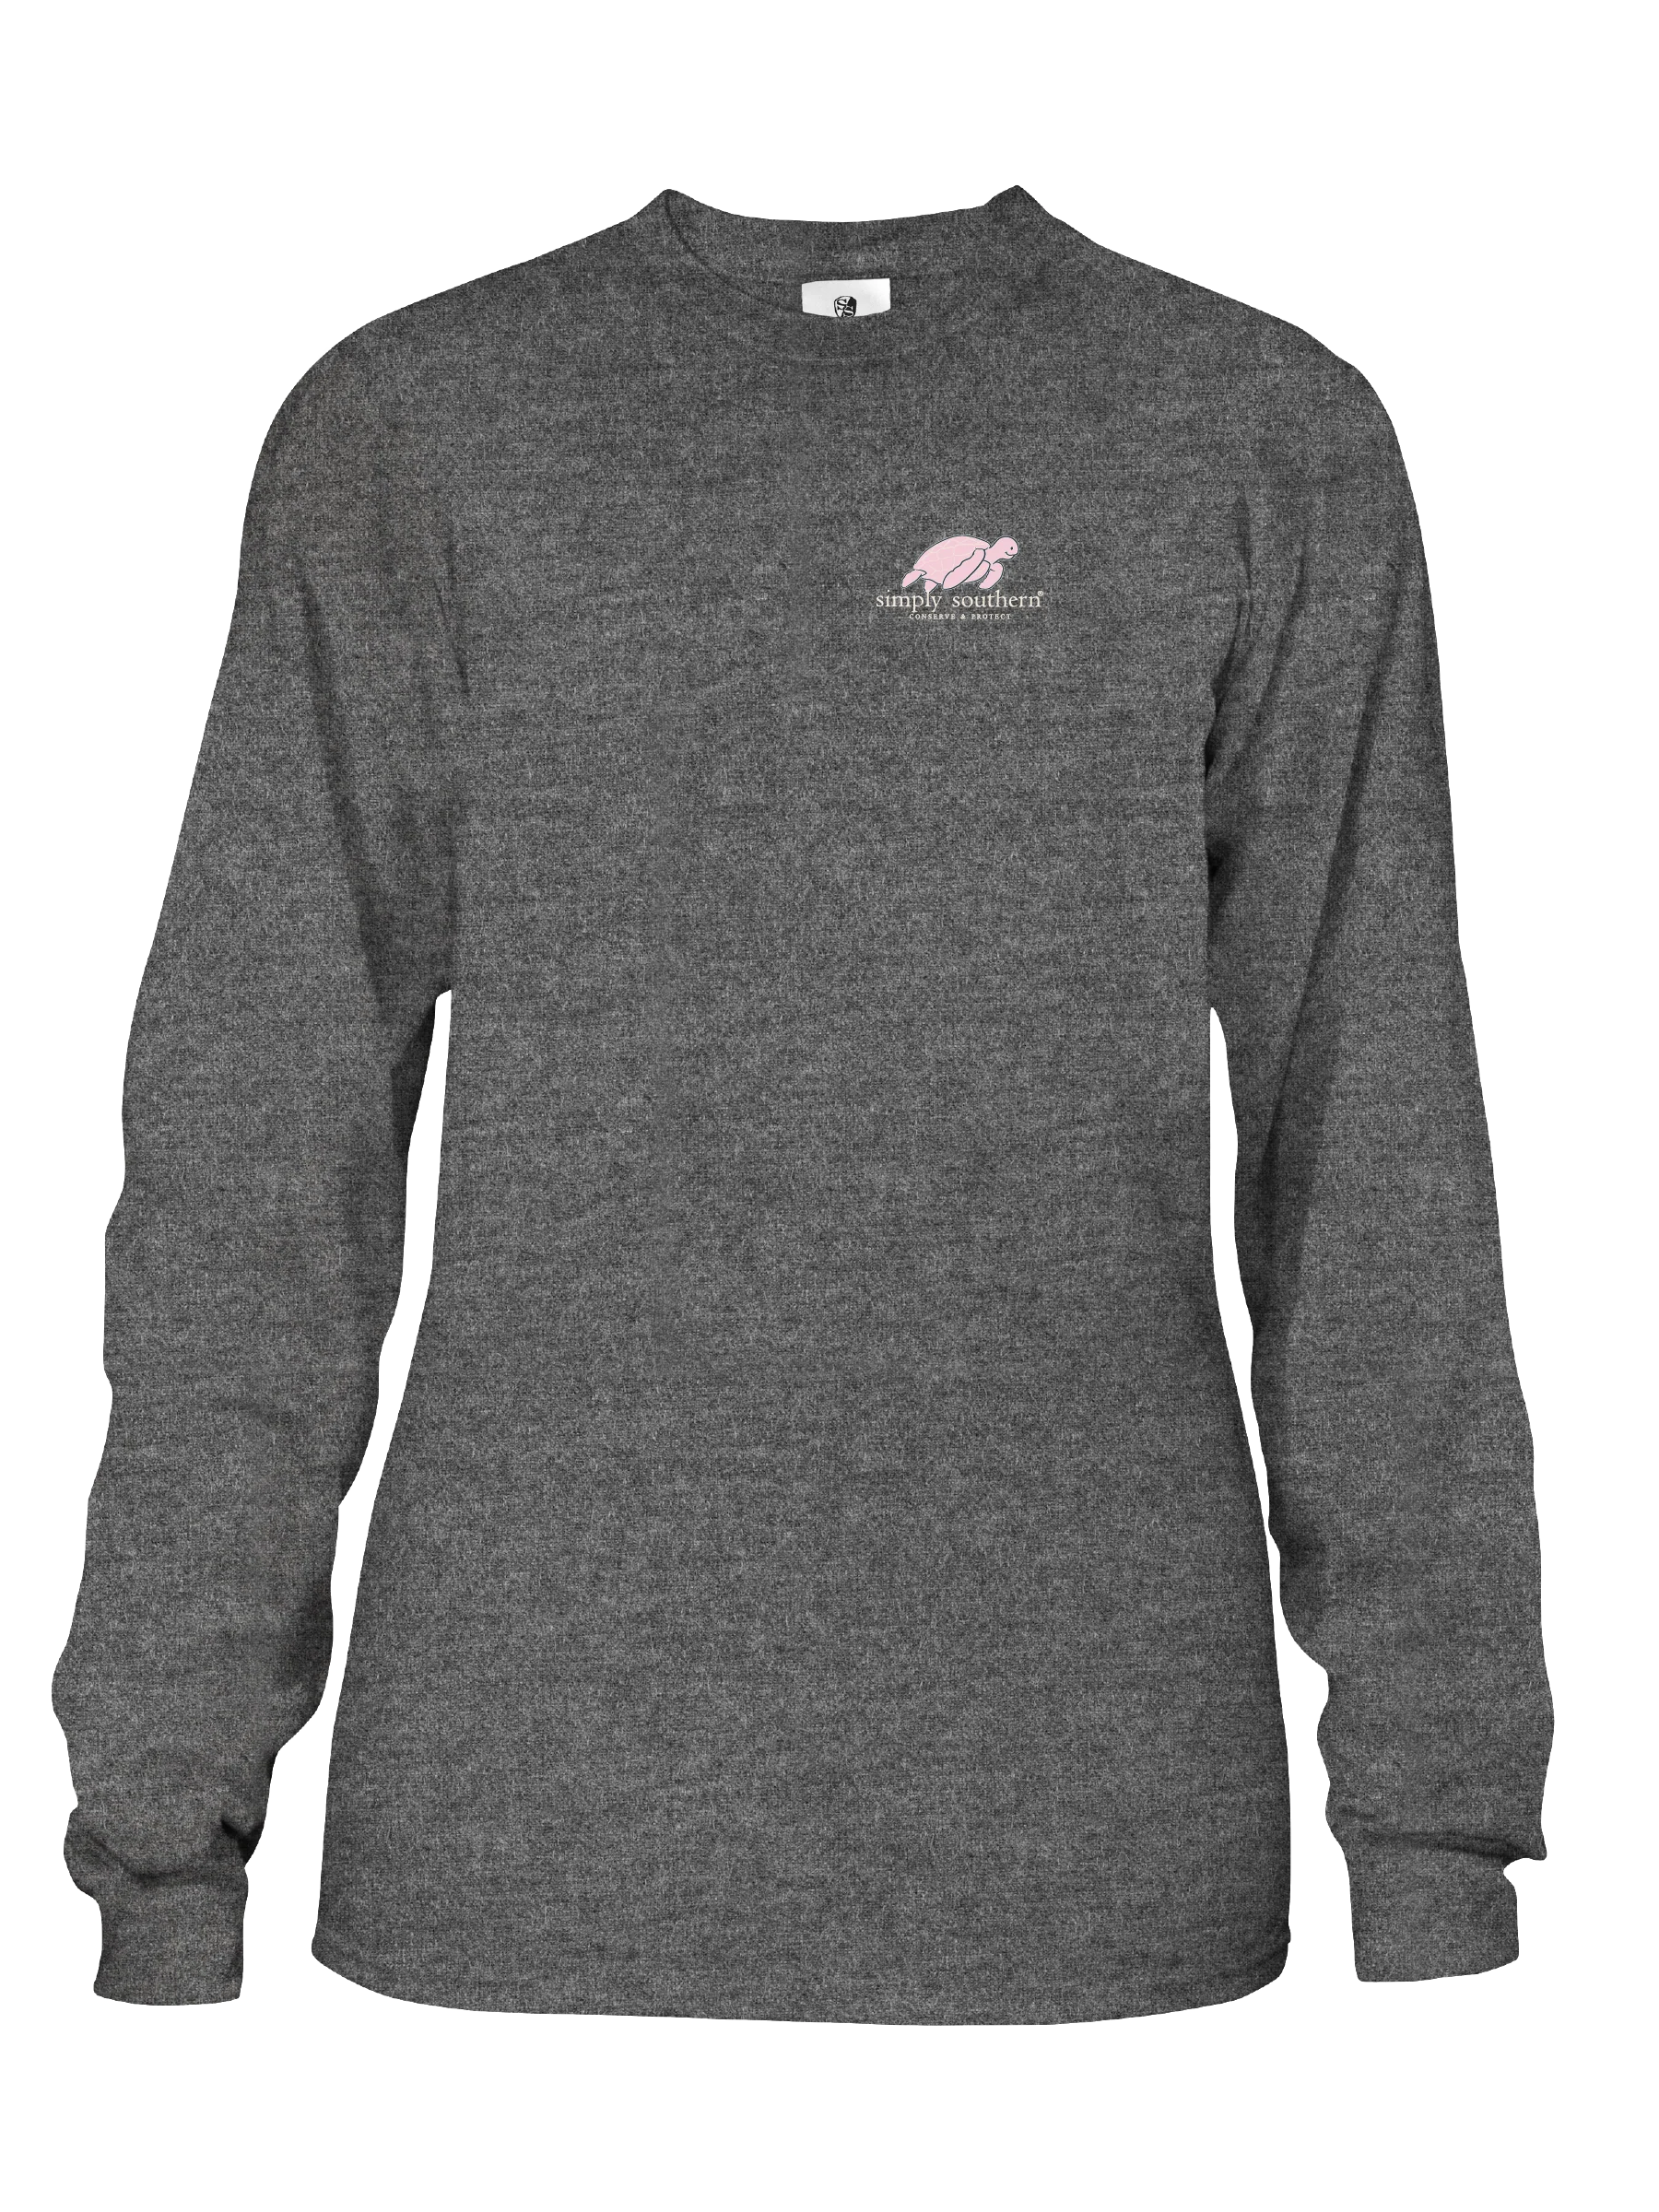 “Save" Long Sleeve Turtle Tracking Tee by Simply Southern